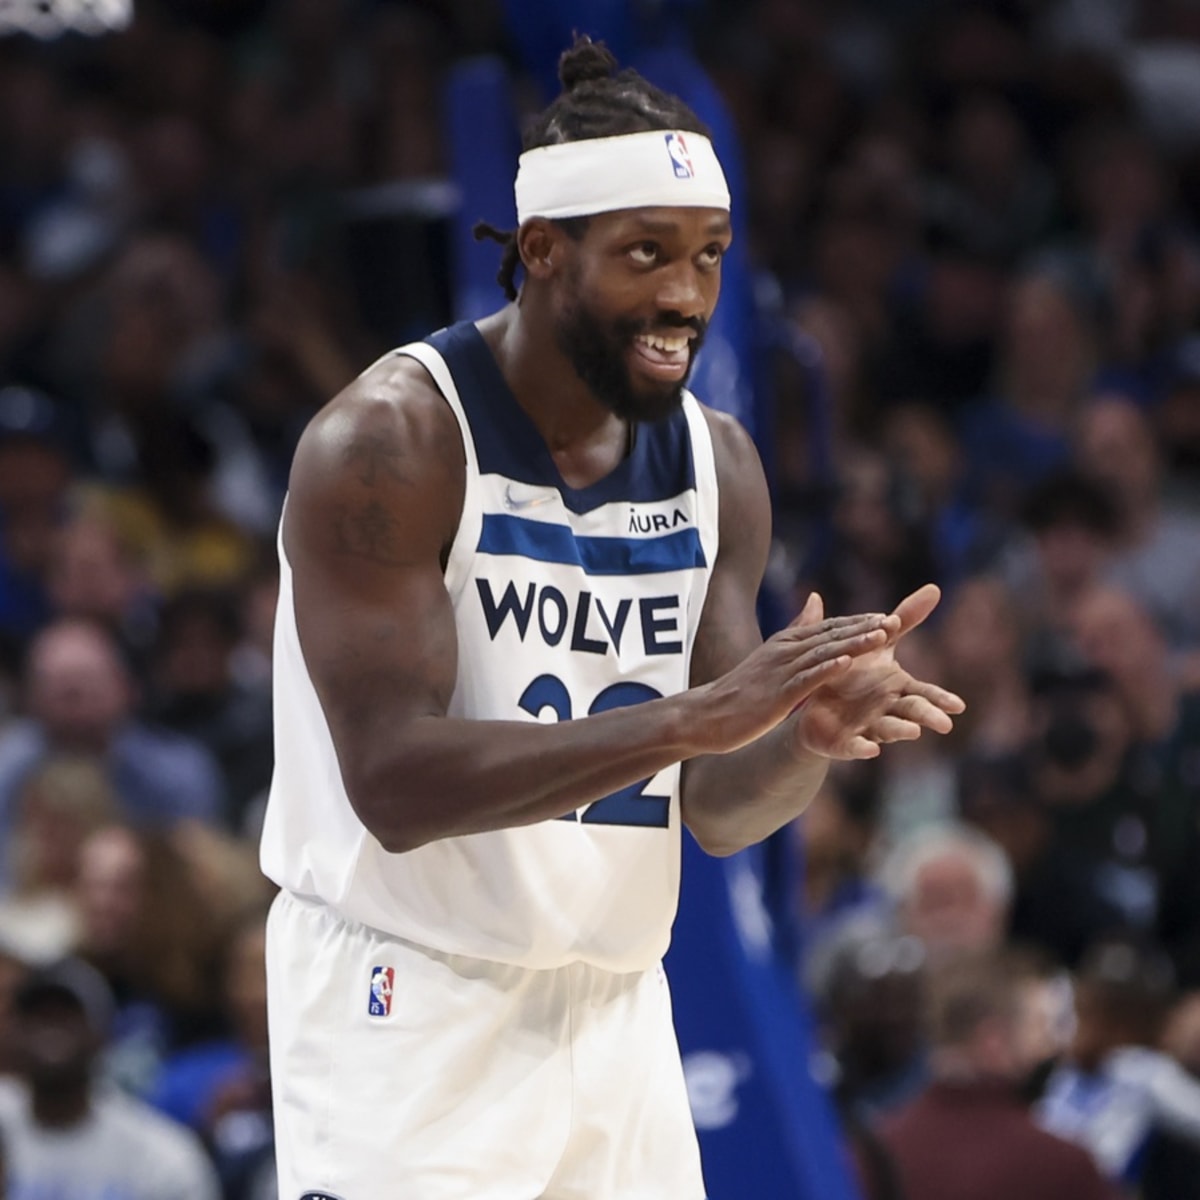 Patrick Beverley remains calm, positive amid Timberwolves